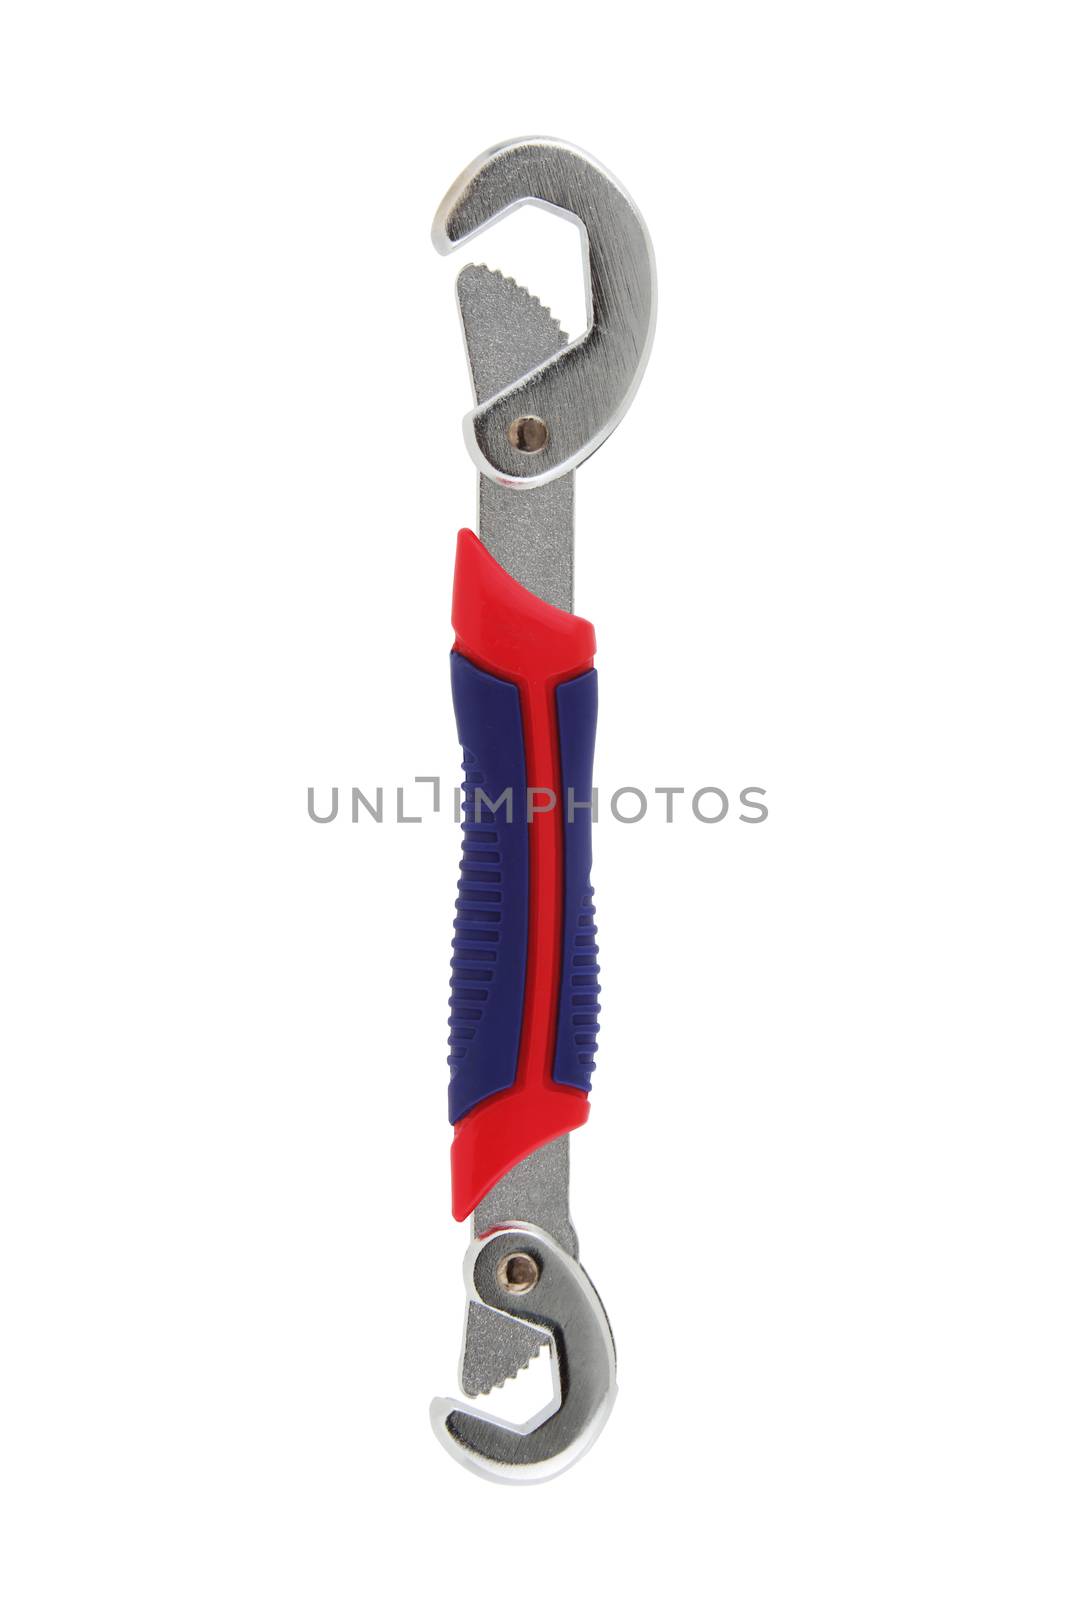 A double ended adjustable wrench spanner on white with clipping path